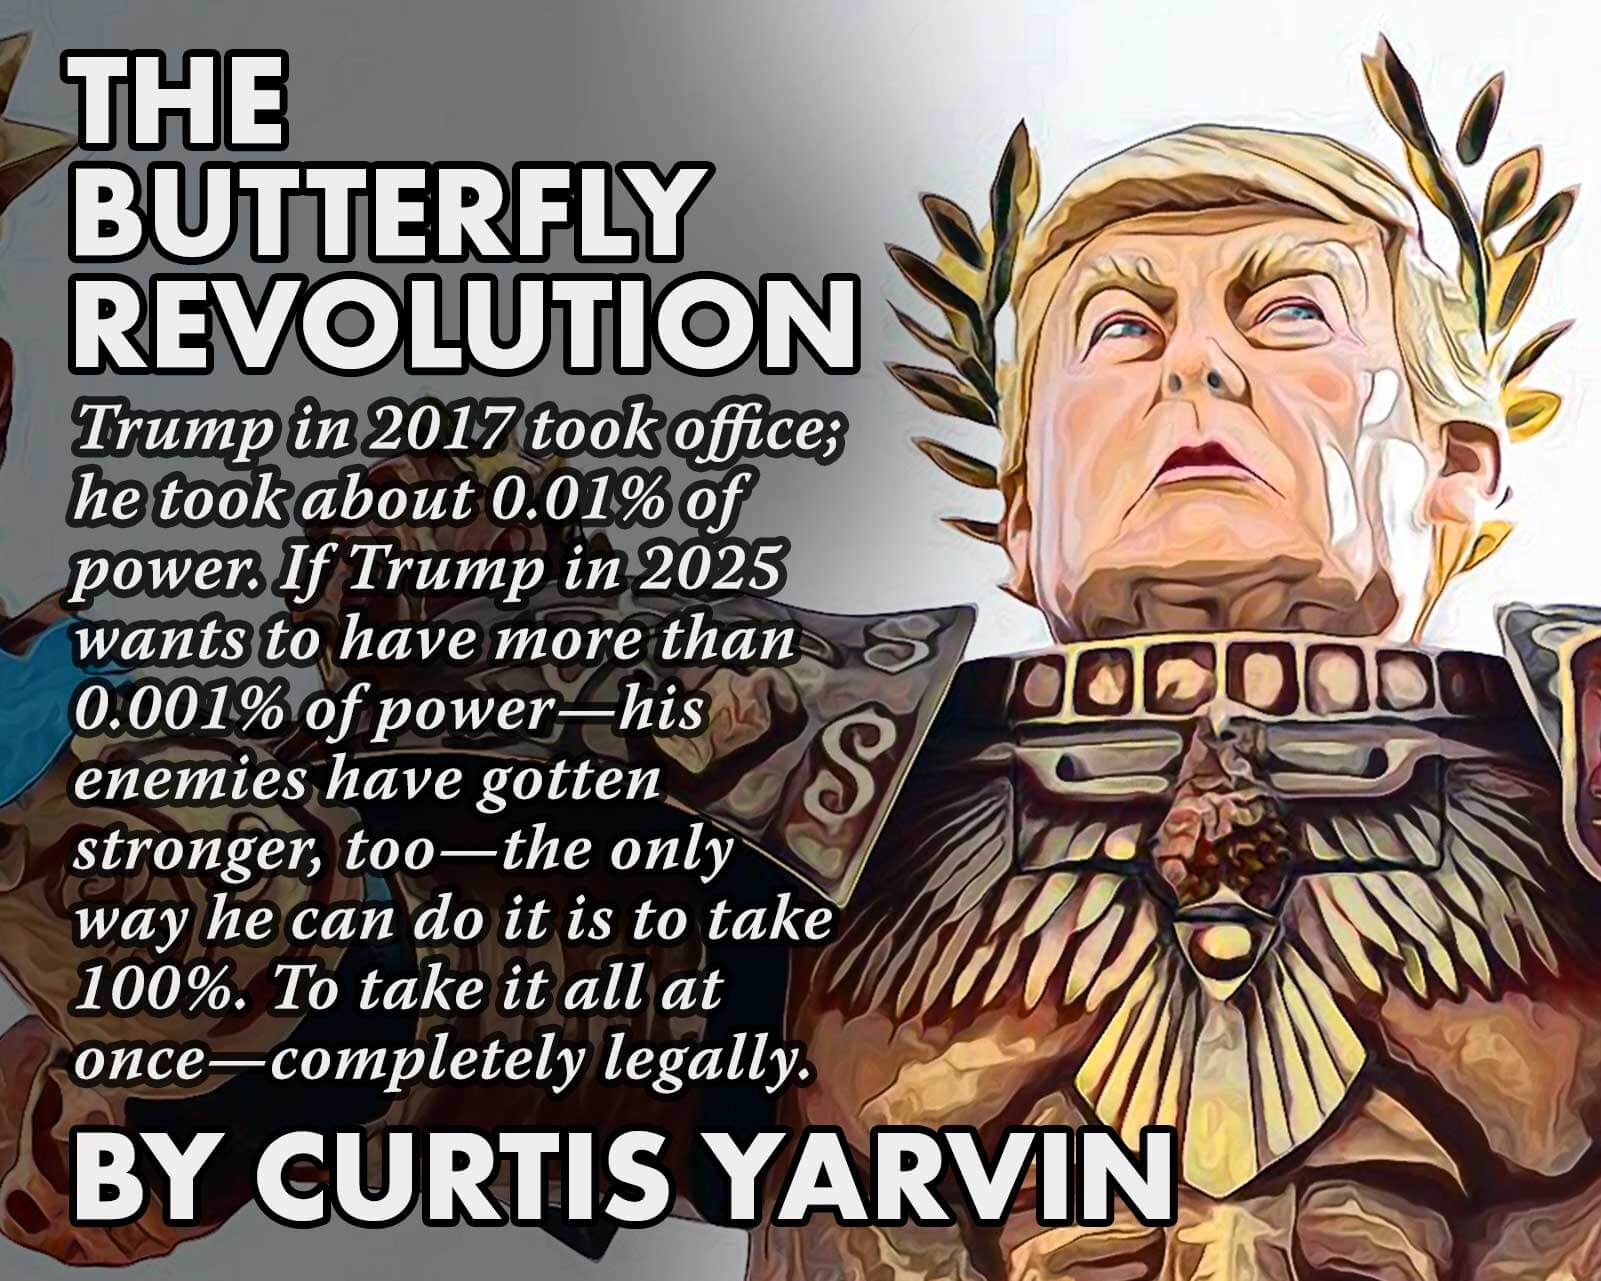 The Butterfly Revolution by Curtis Yarvin (graymirror.substack.com)